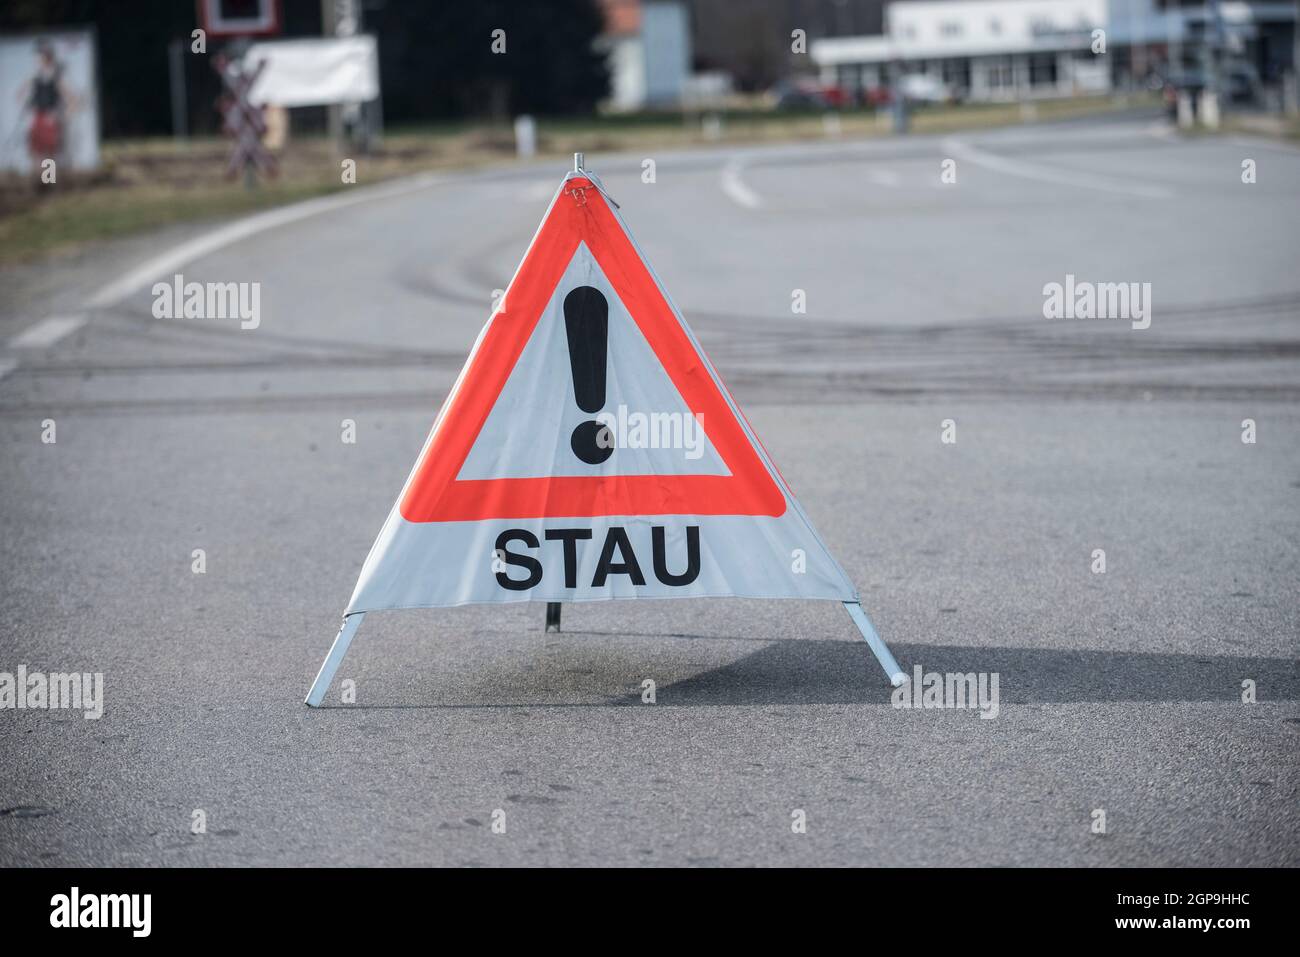 red and white warning triangle congestion (Stau) sign, standing on the road Stock Photo